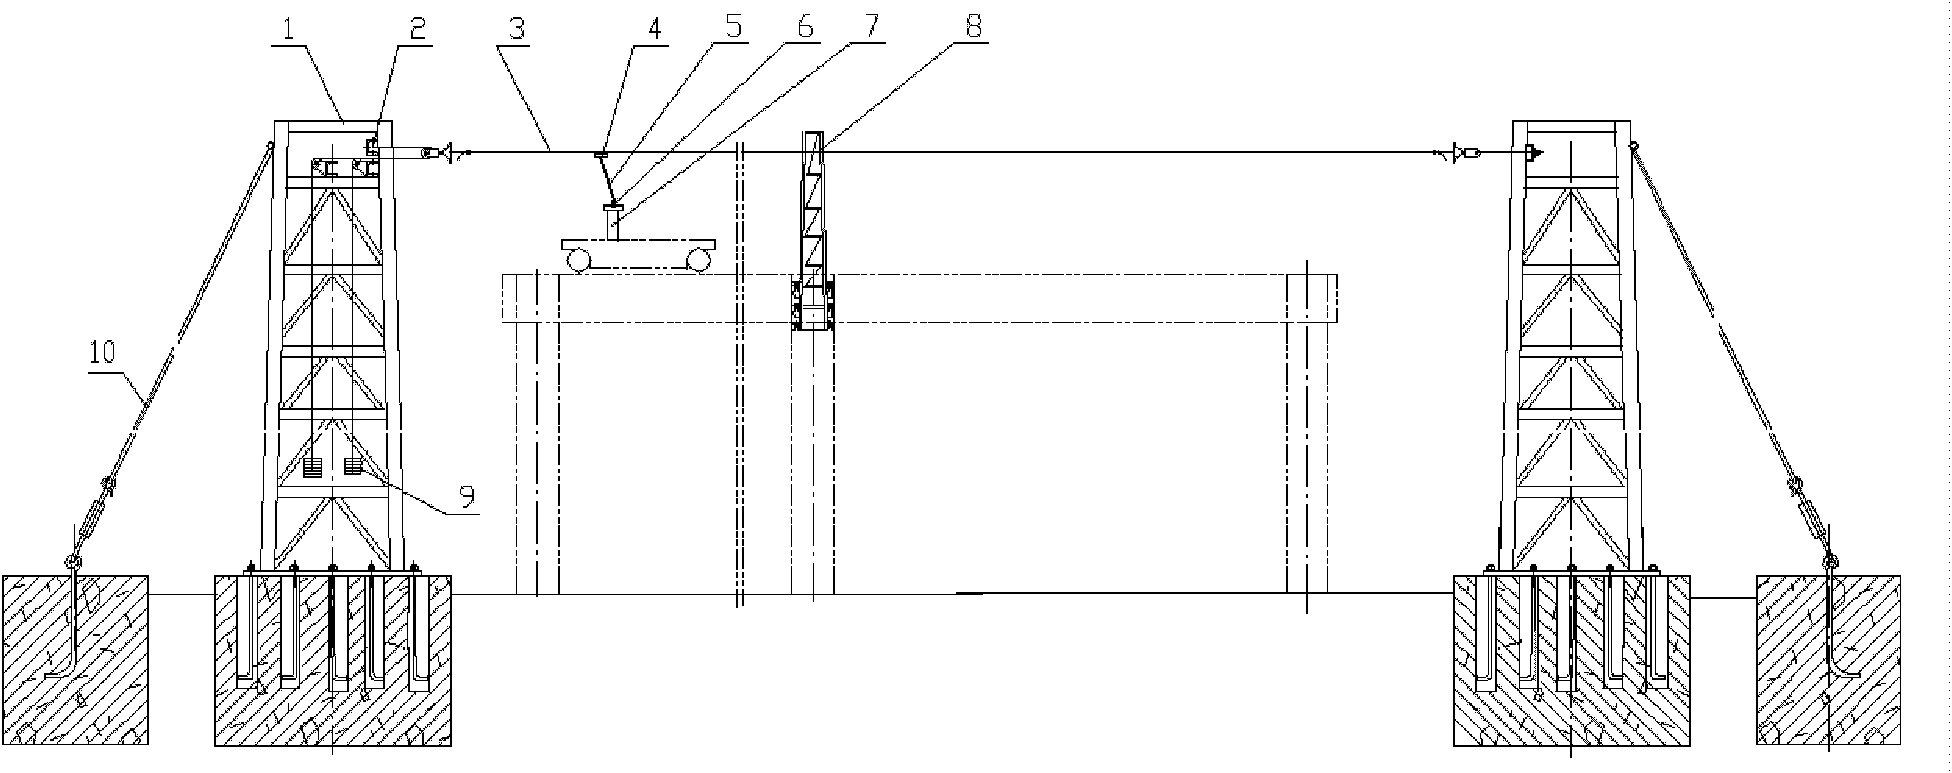 Slide-transmission wire used in overhead crane